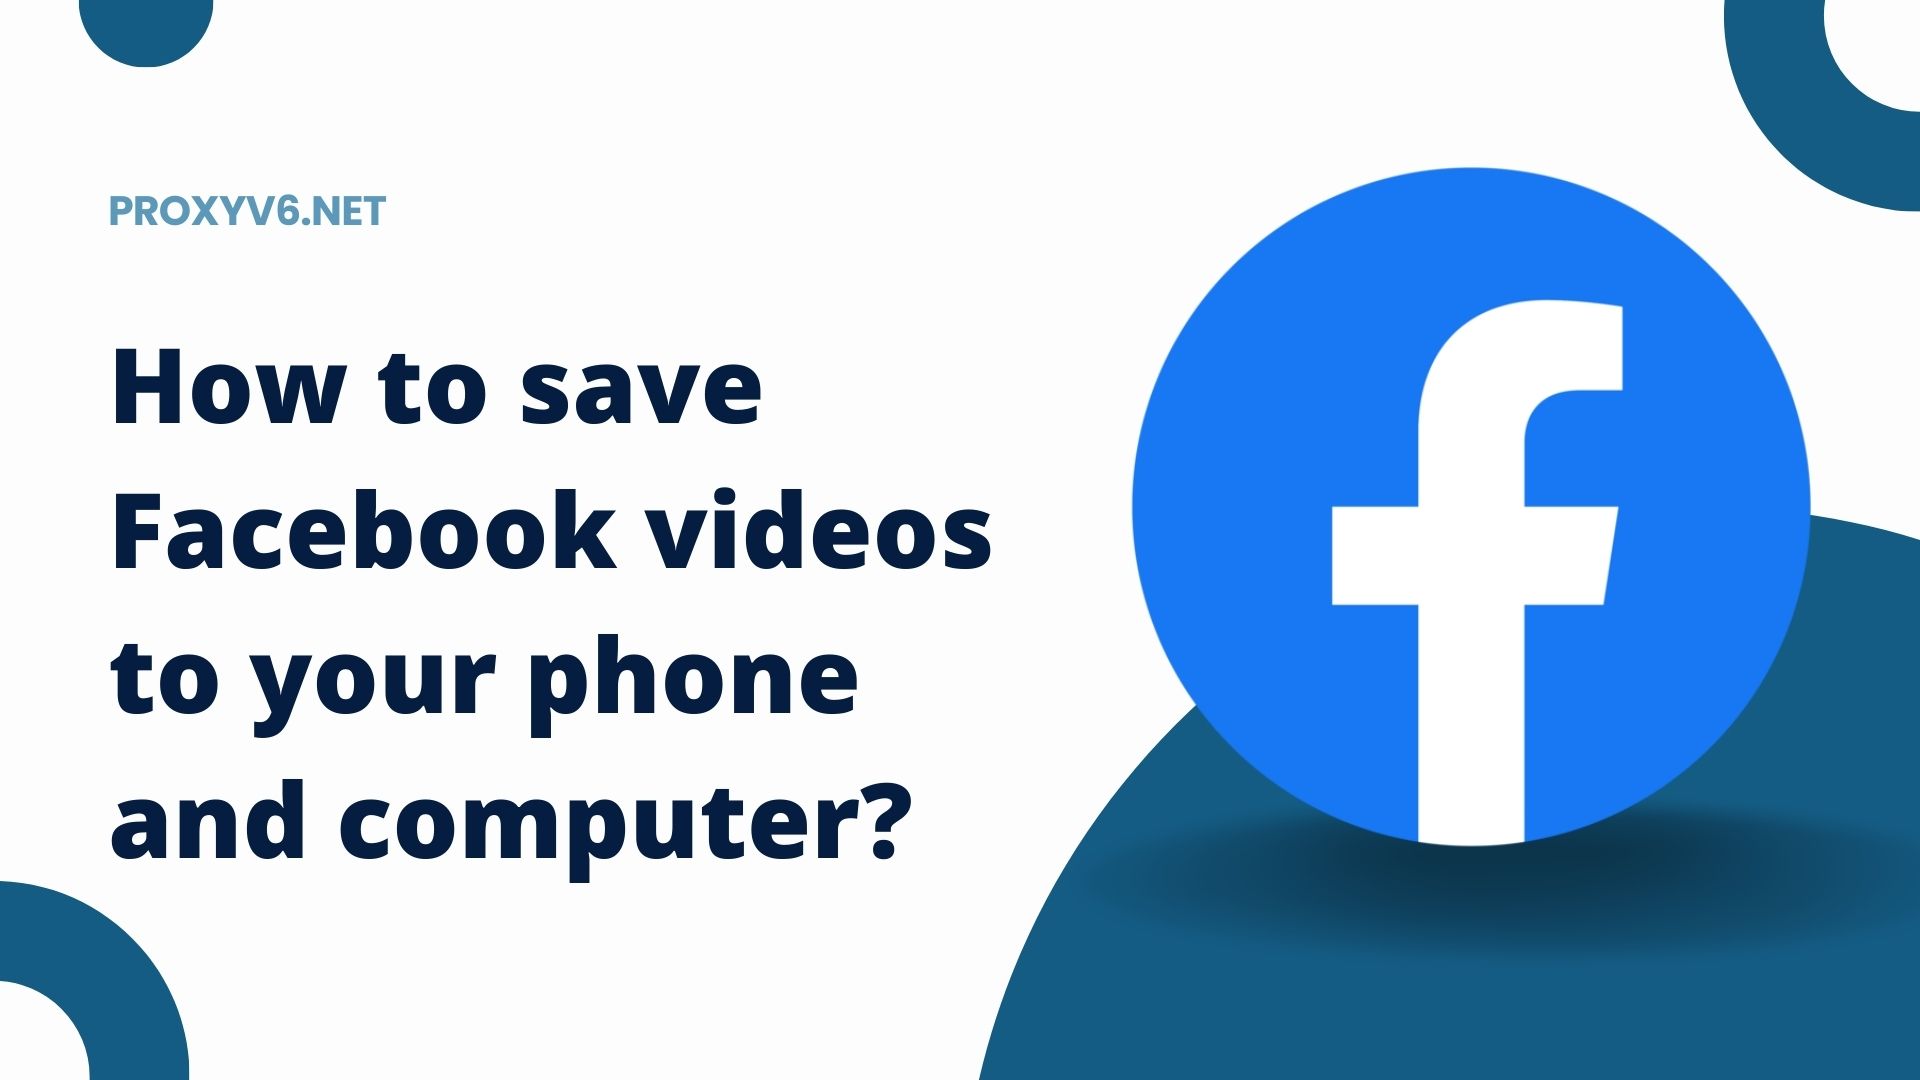 How to save Facebook videos to your phone and computer?